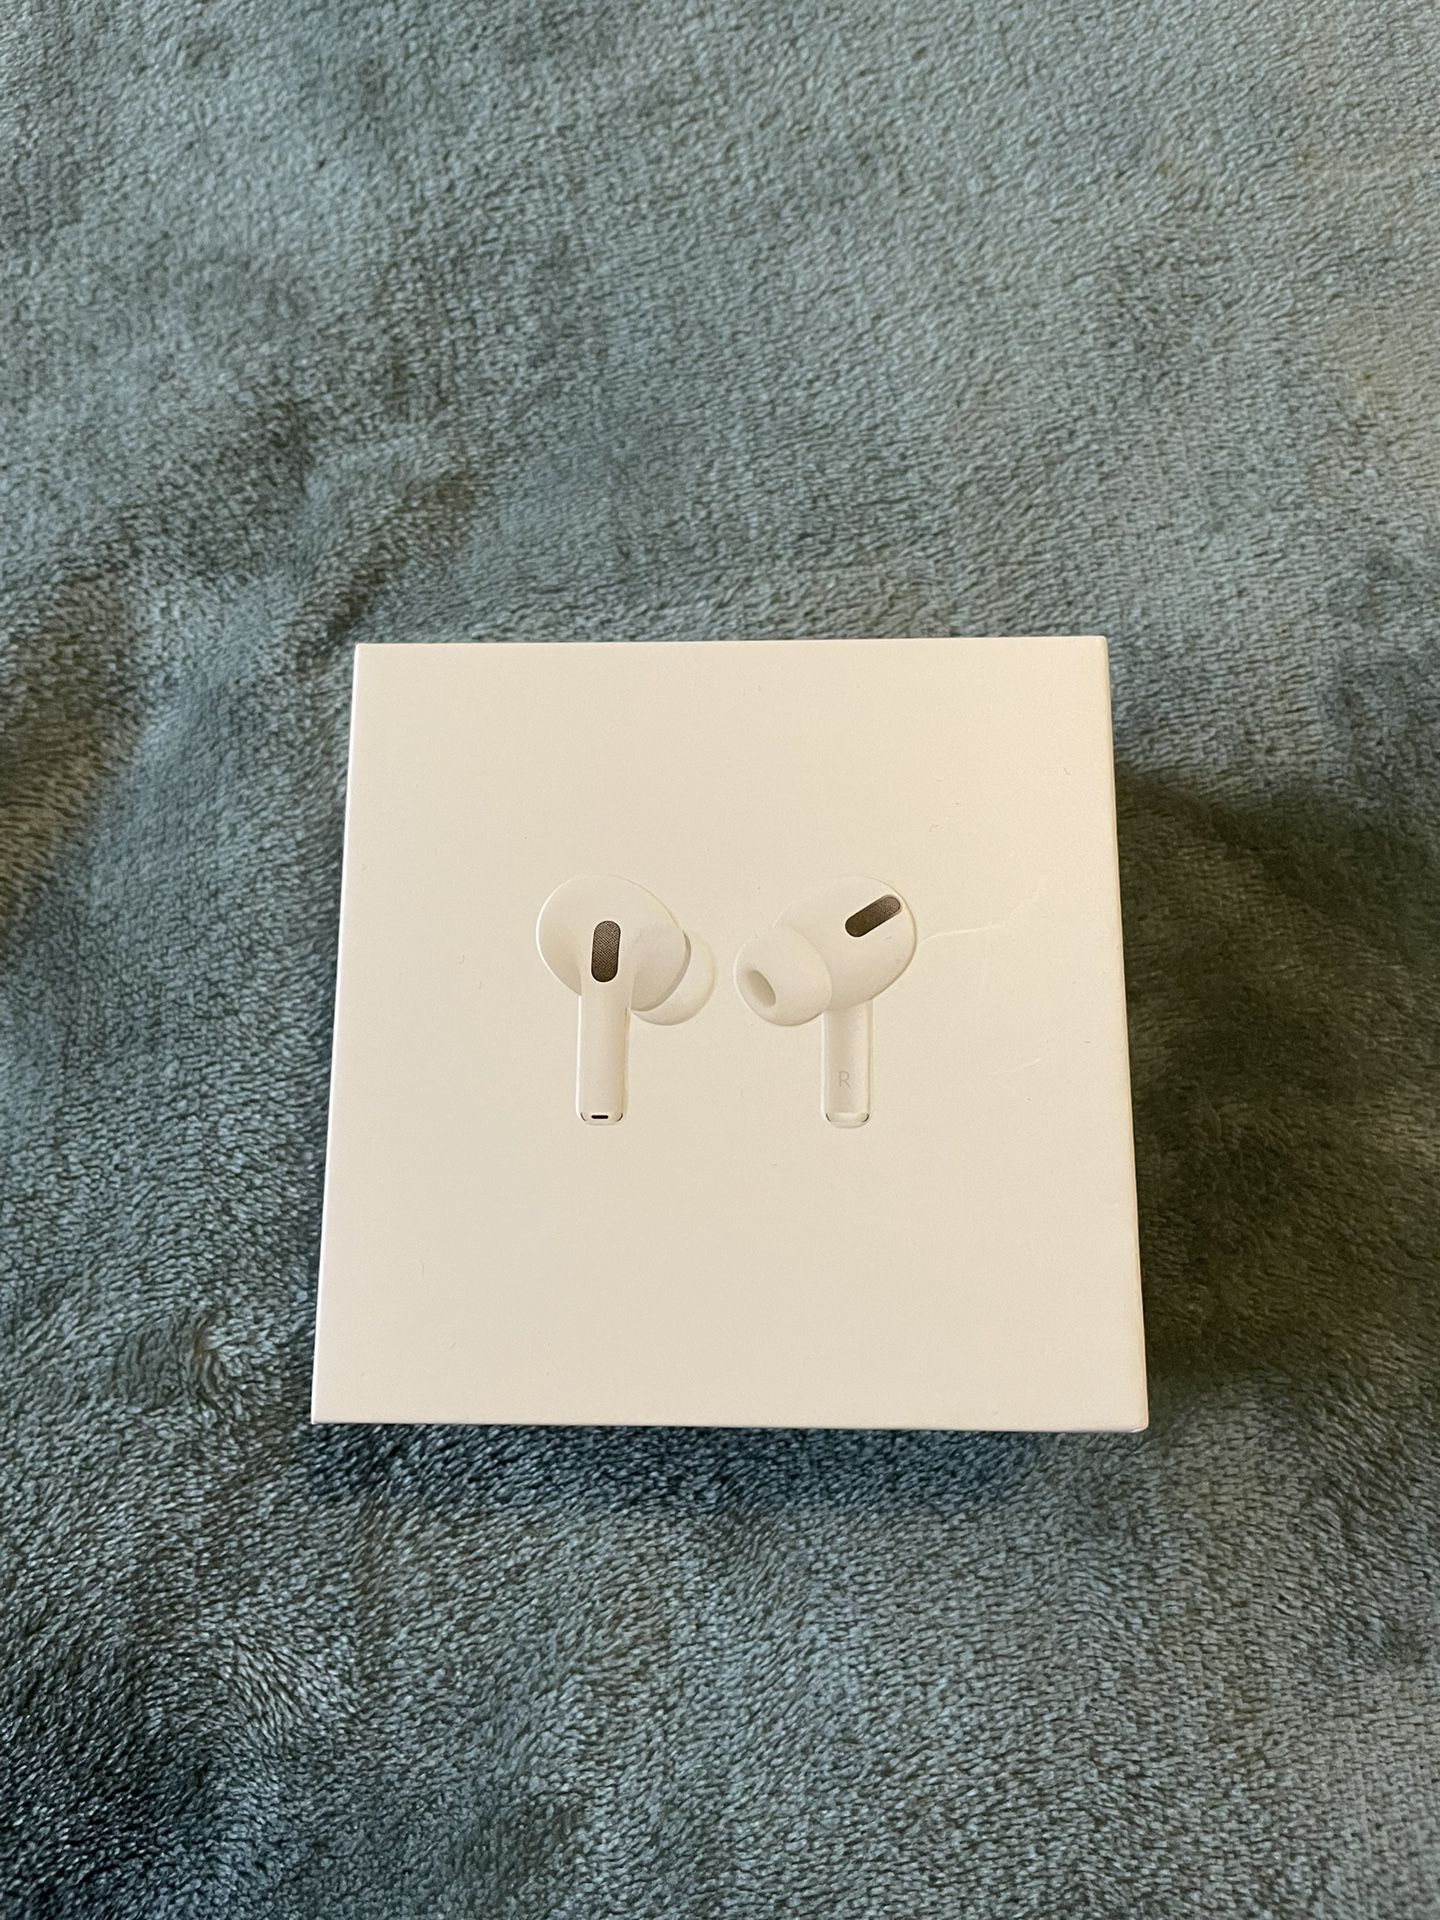 Airpods Pro  ( Send Offers)